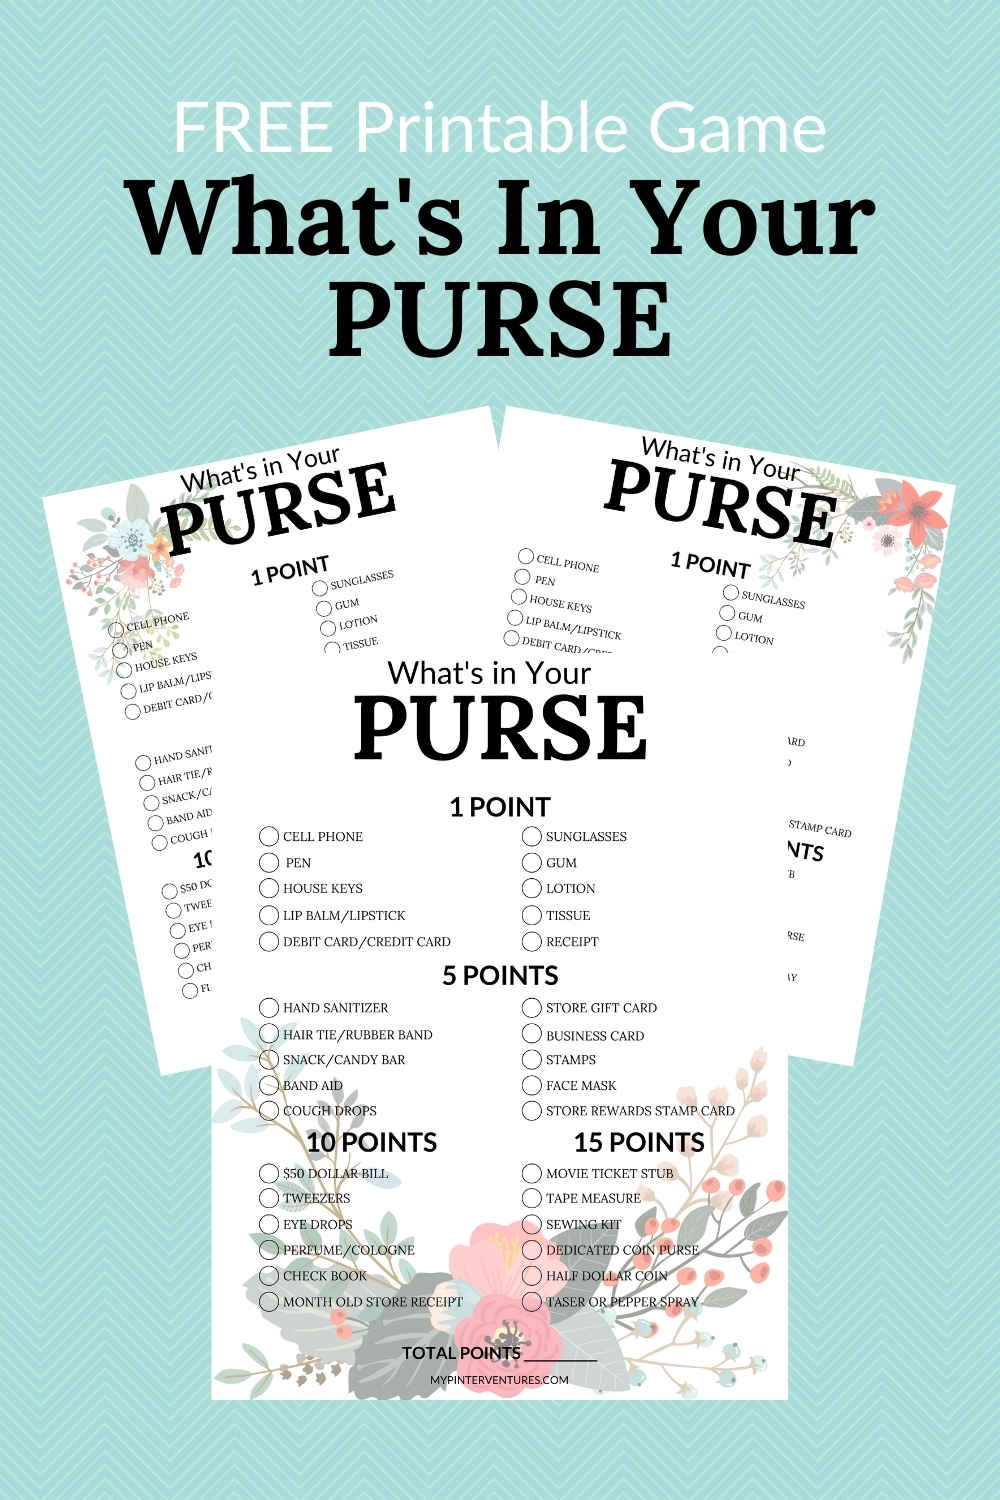 what-s-in-your-purse-printable-game-my-pinterventures